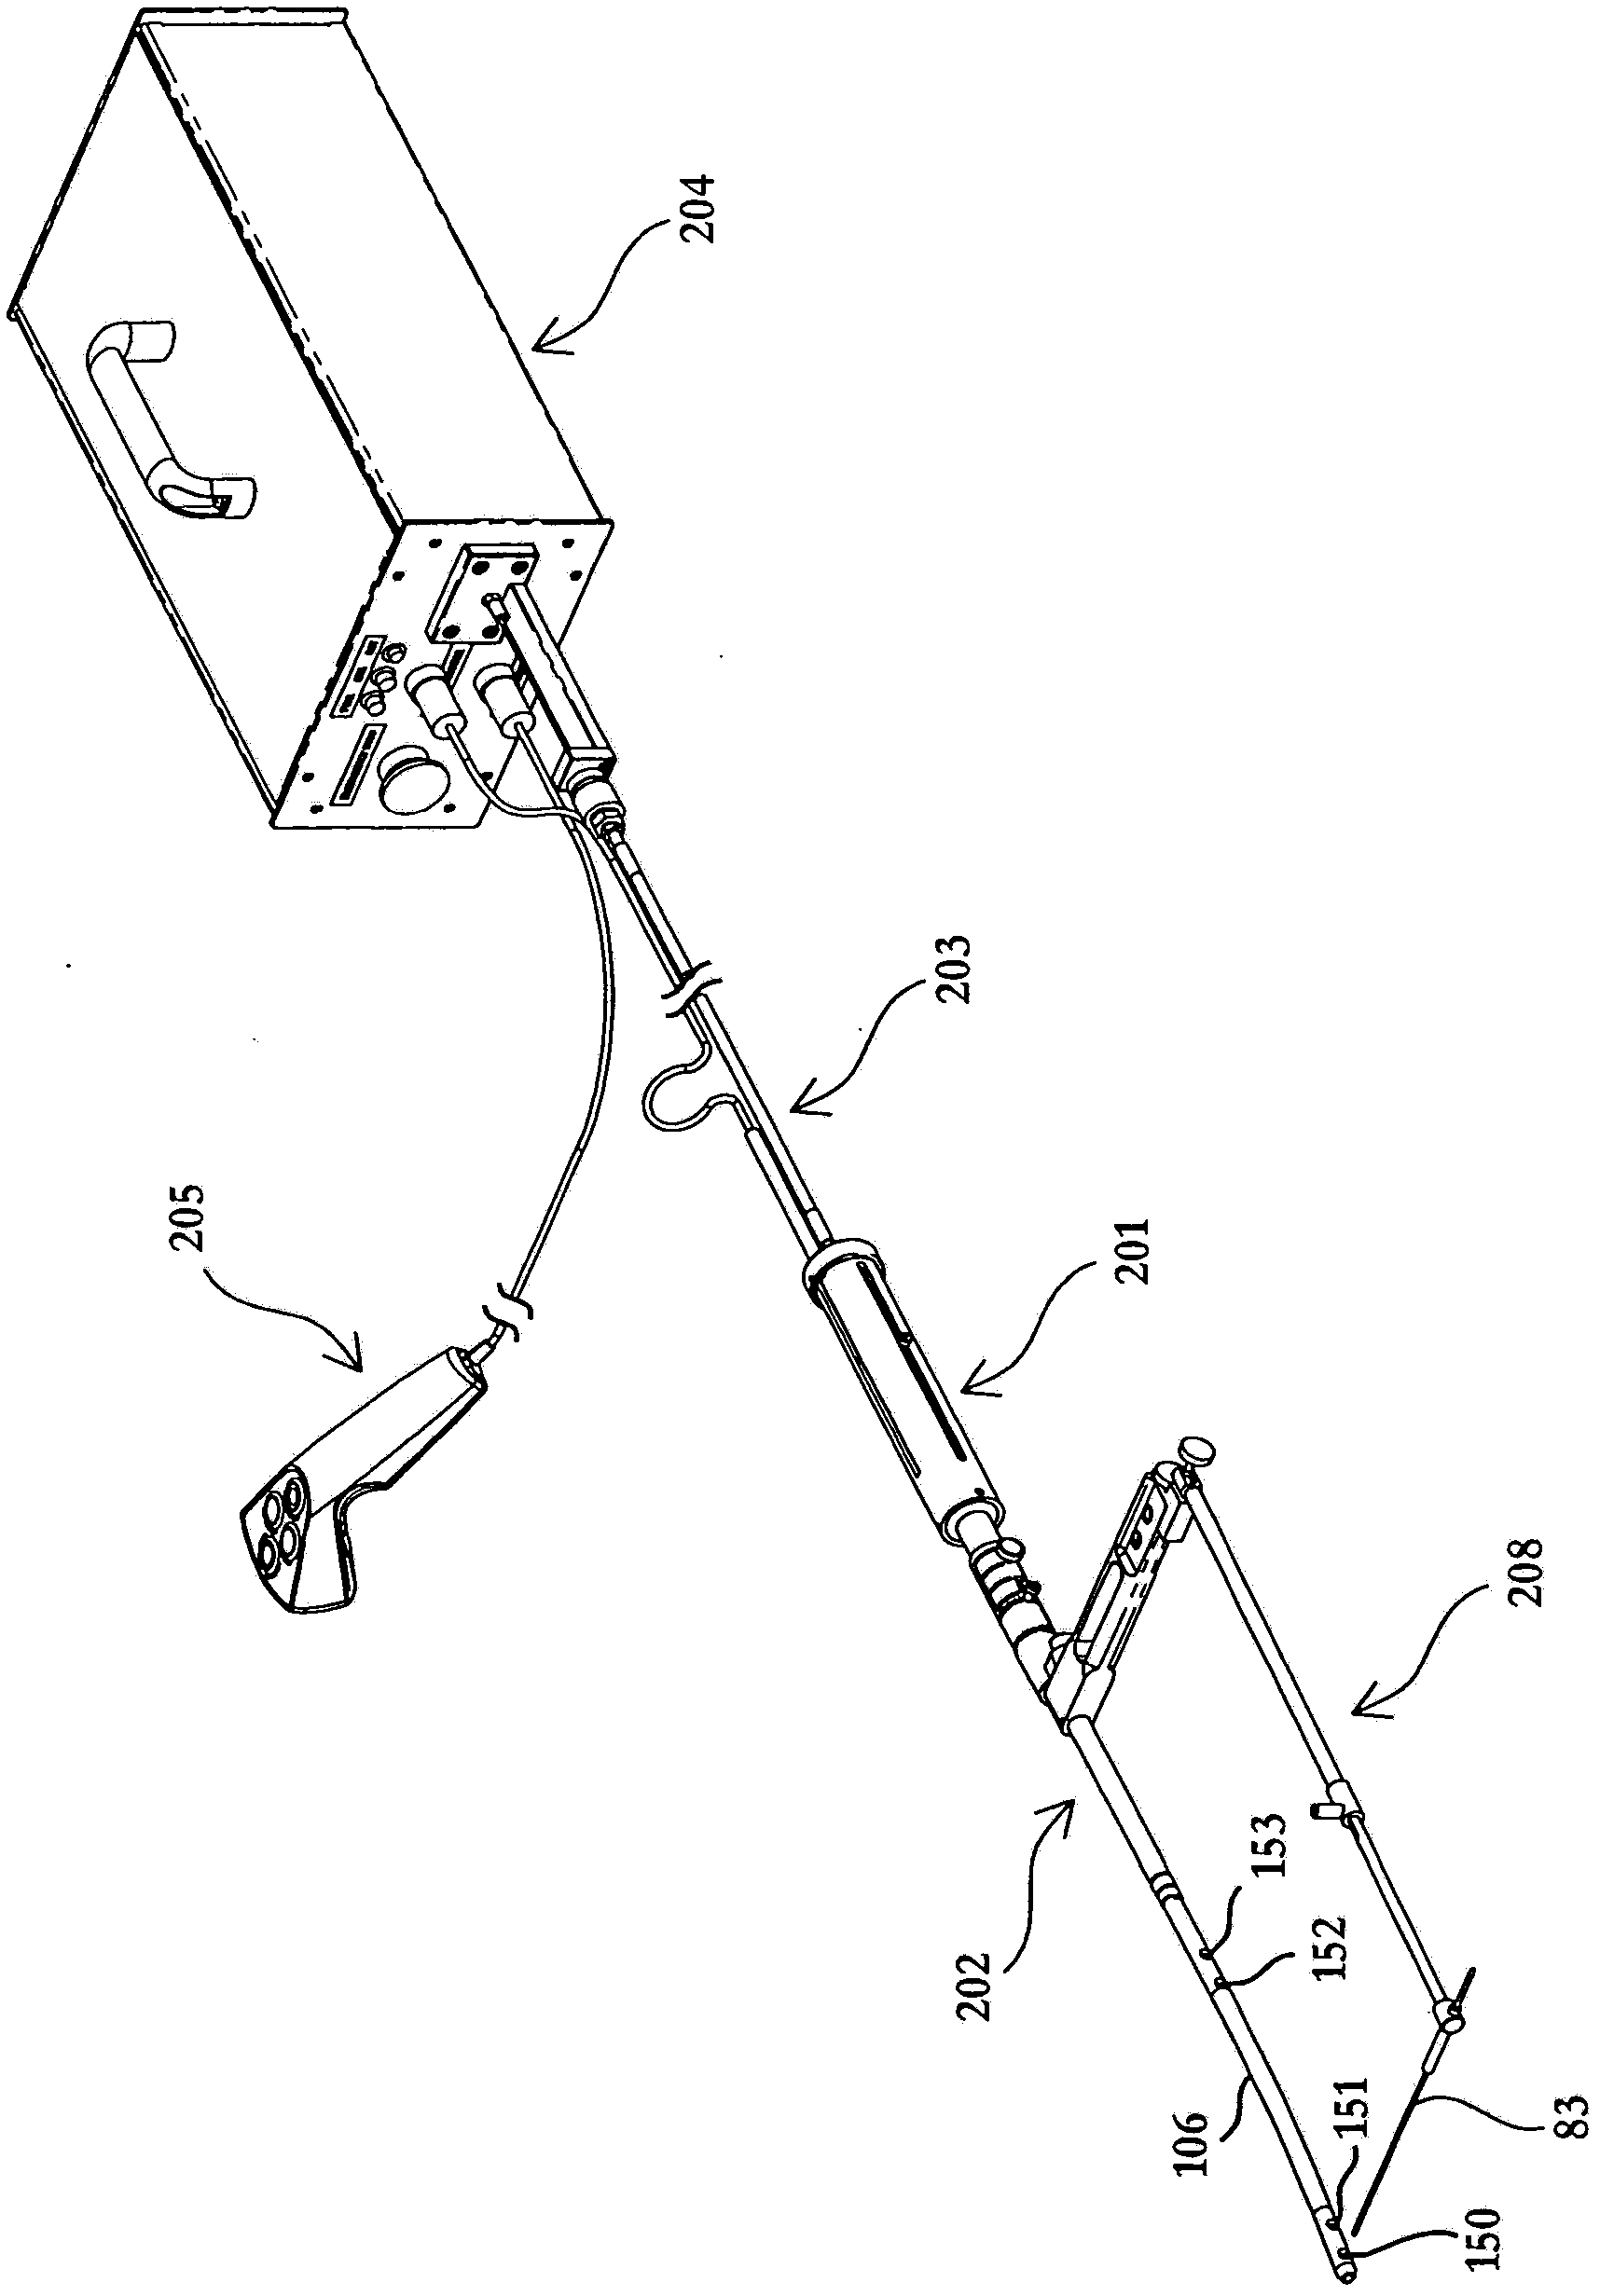 Drill assembly and system and method for forming a pilot hole